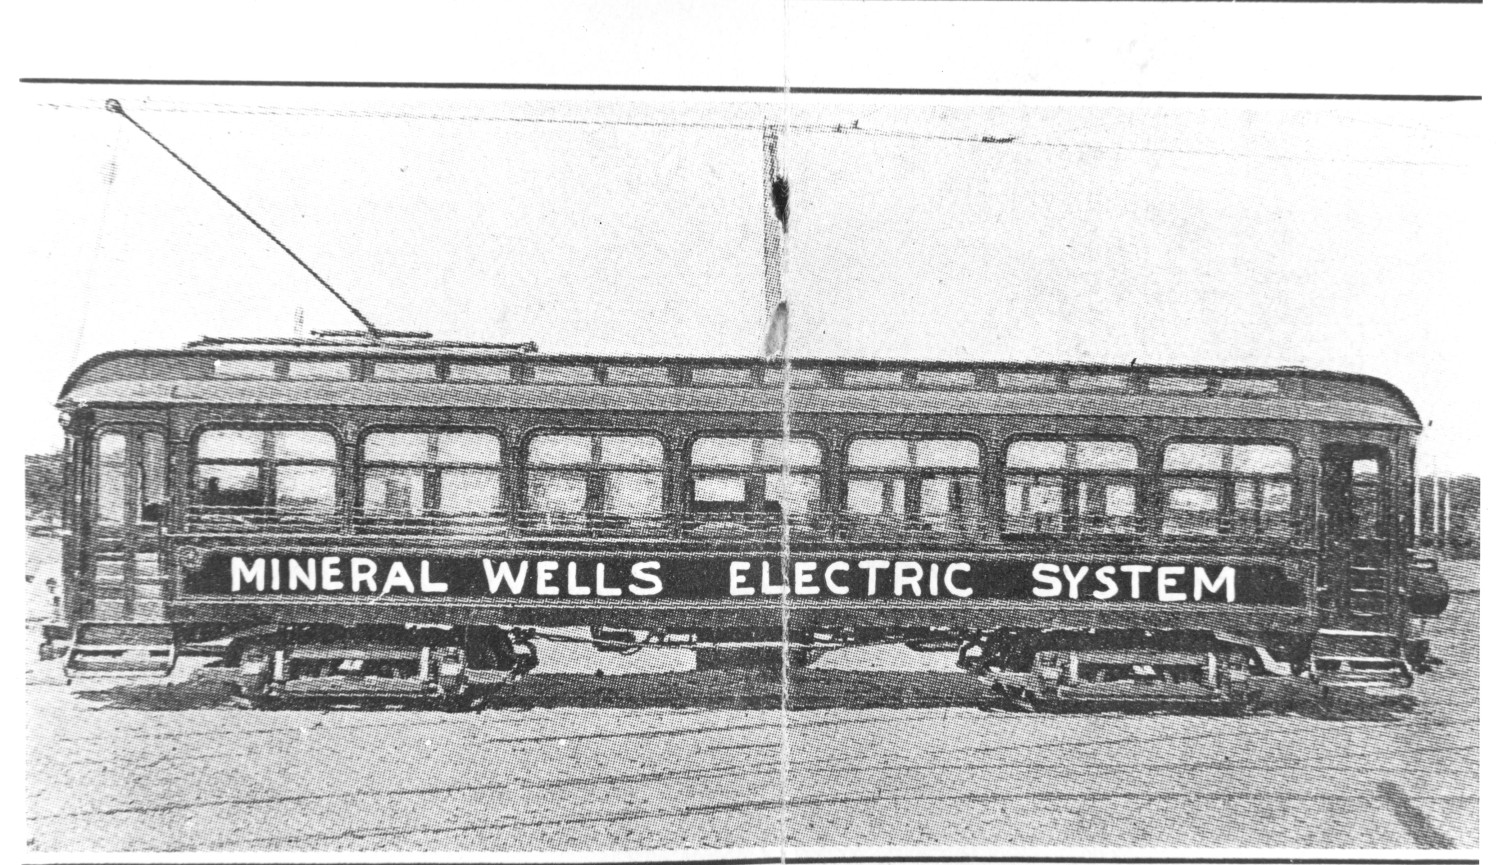 [A Trolley Car of the] Mineral Wells Electric System
                                                
                                                    [Sequence #]: 1 of 1
                                                